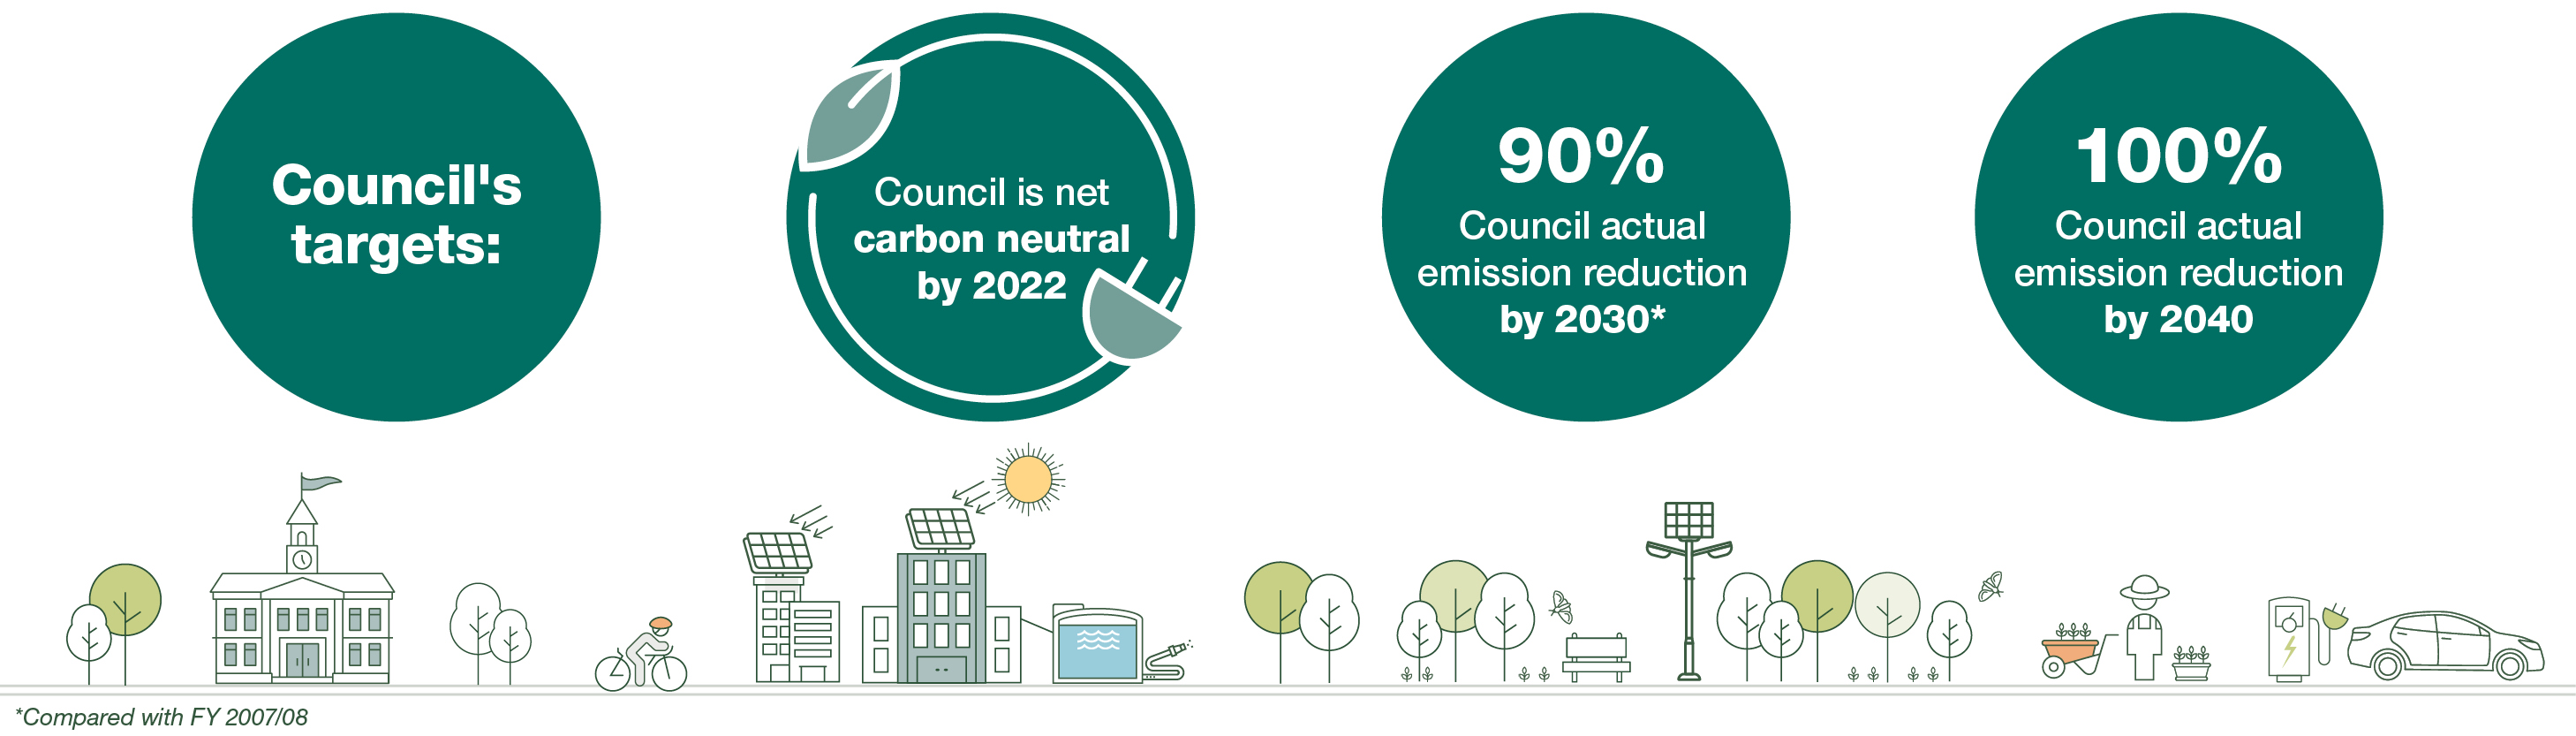 A streetscape illustration with Council's targets: Council is net carbon neutral by 2022. 90% Council actual emission reduction by 2030. 100% Council actual emission by 2040.